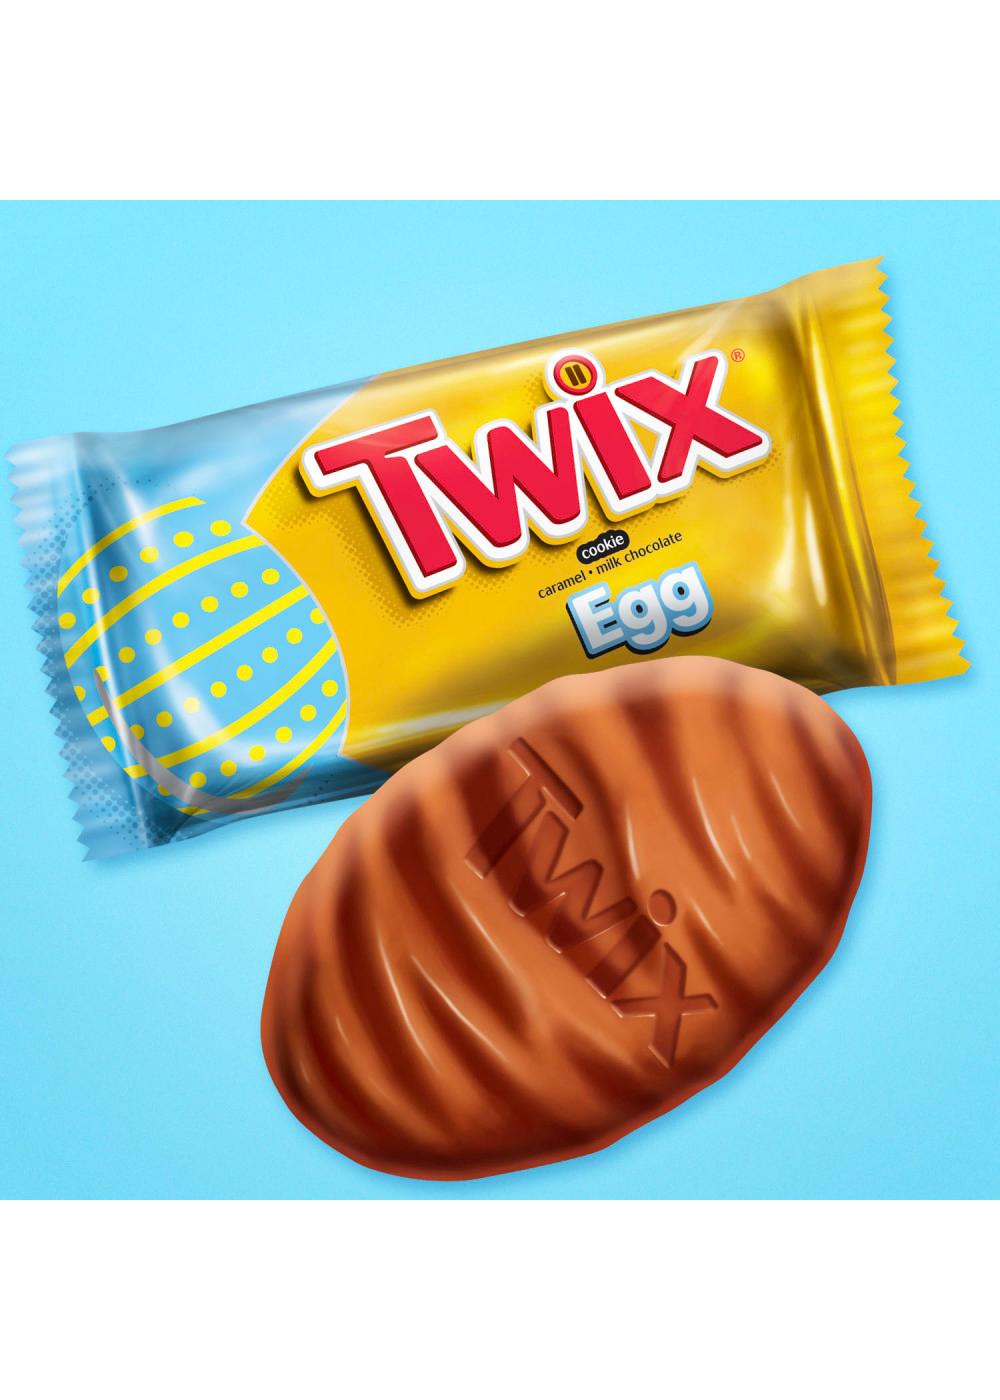 Twix Egg Easter Candy; image 7 of 7